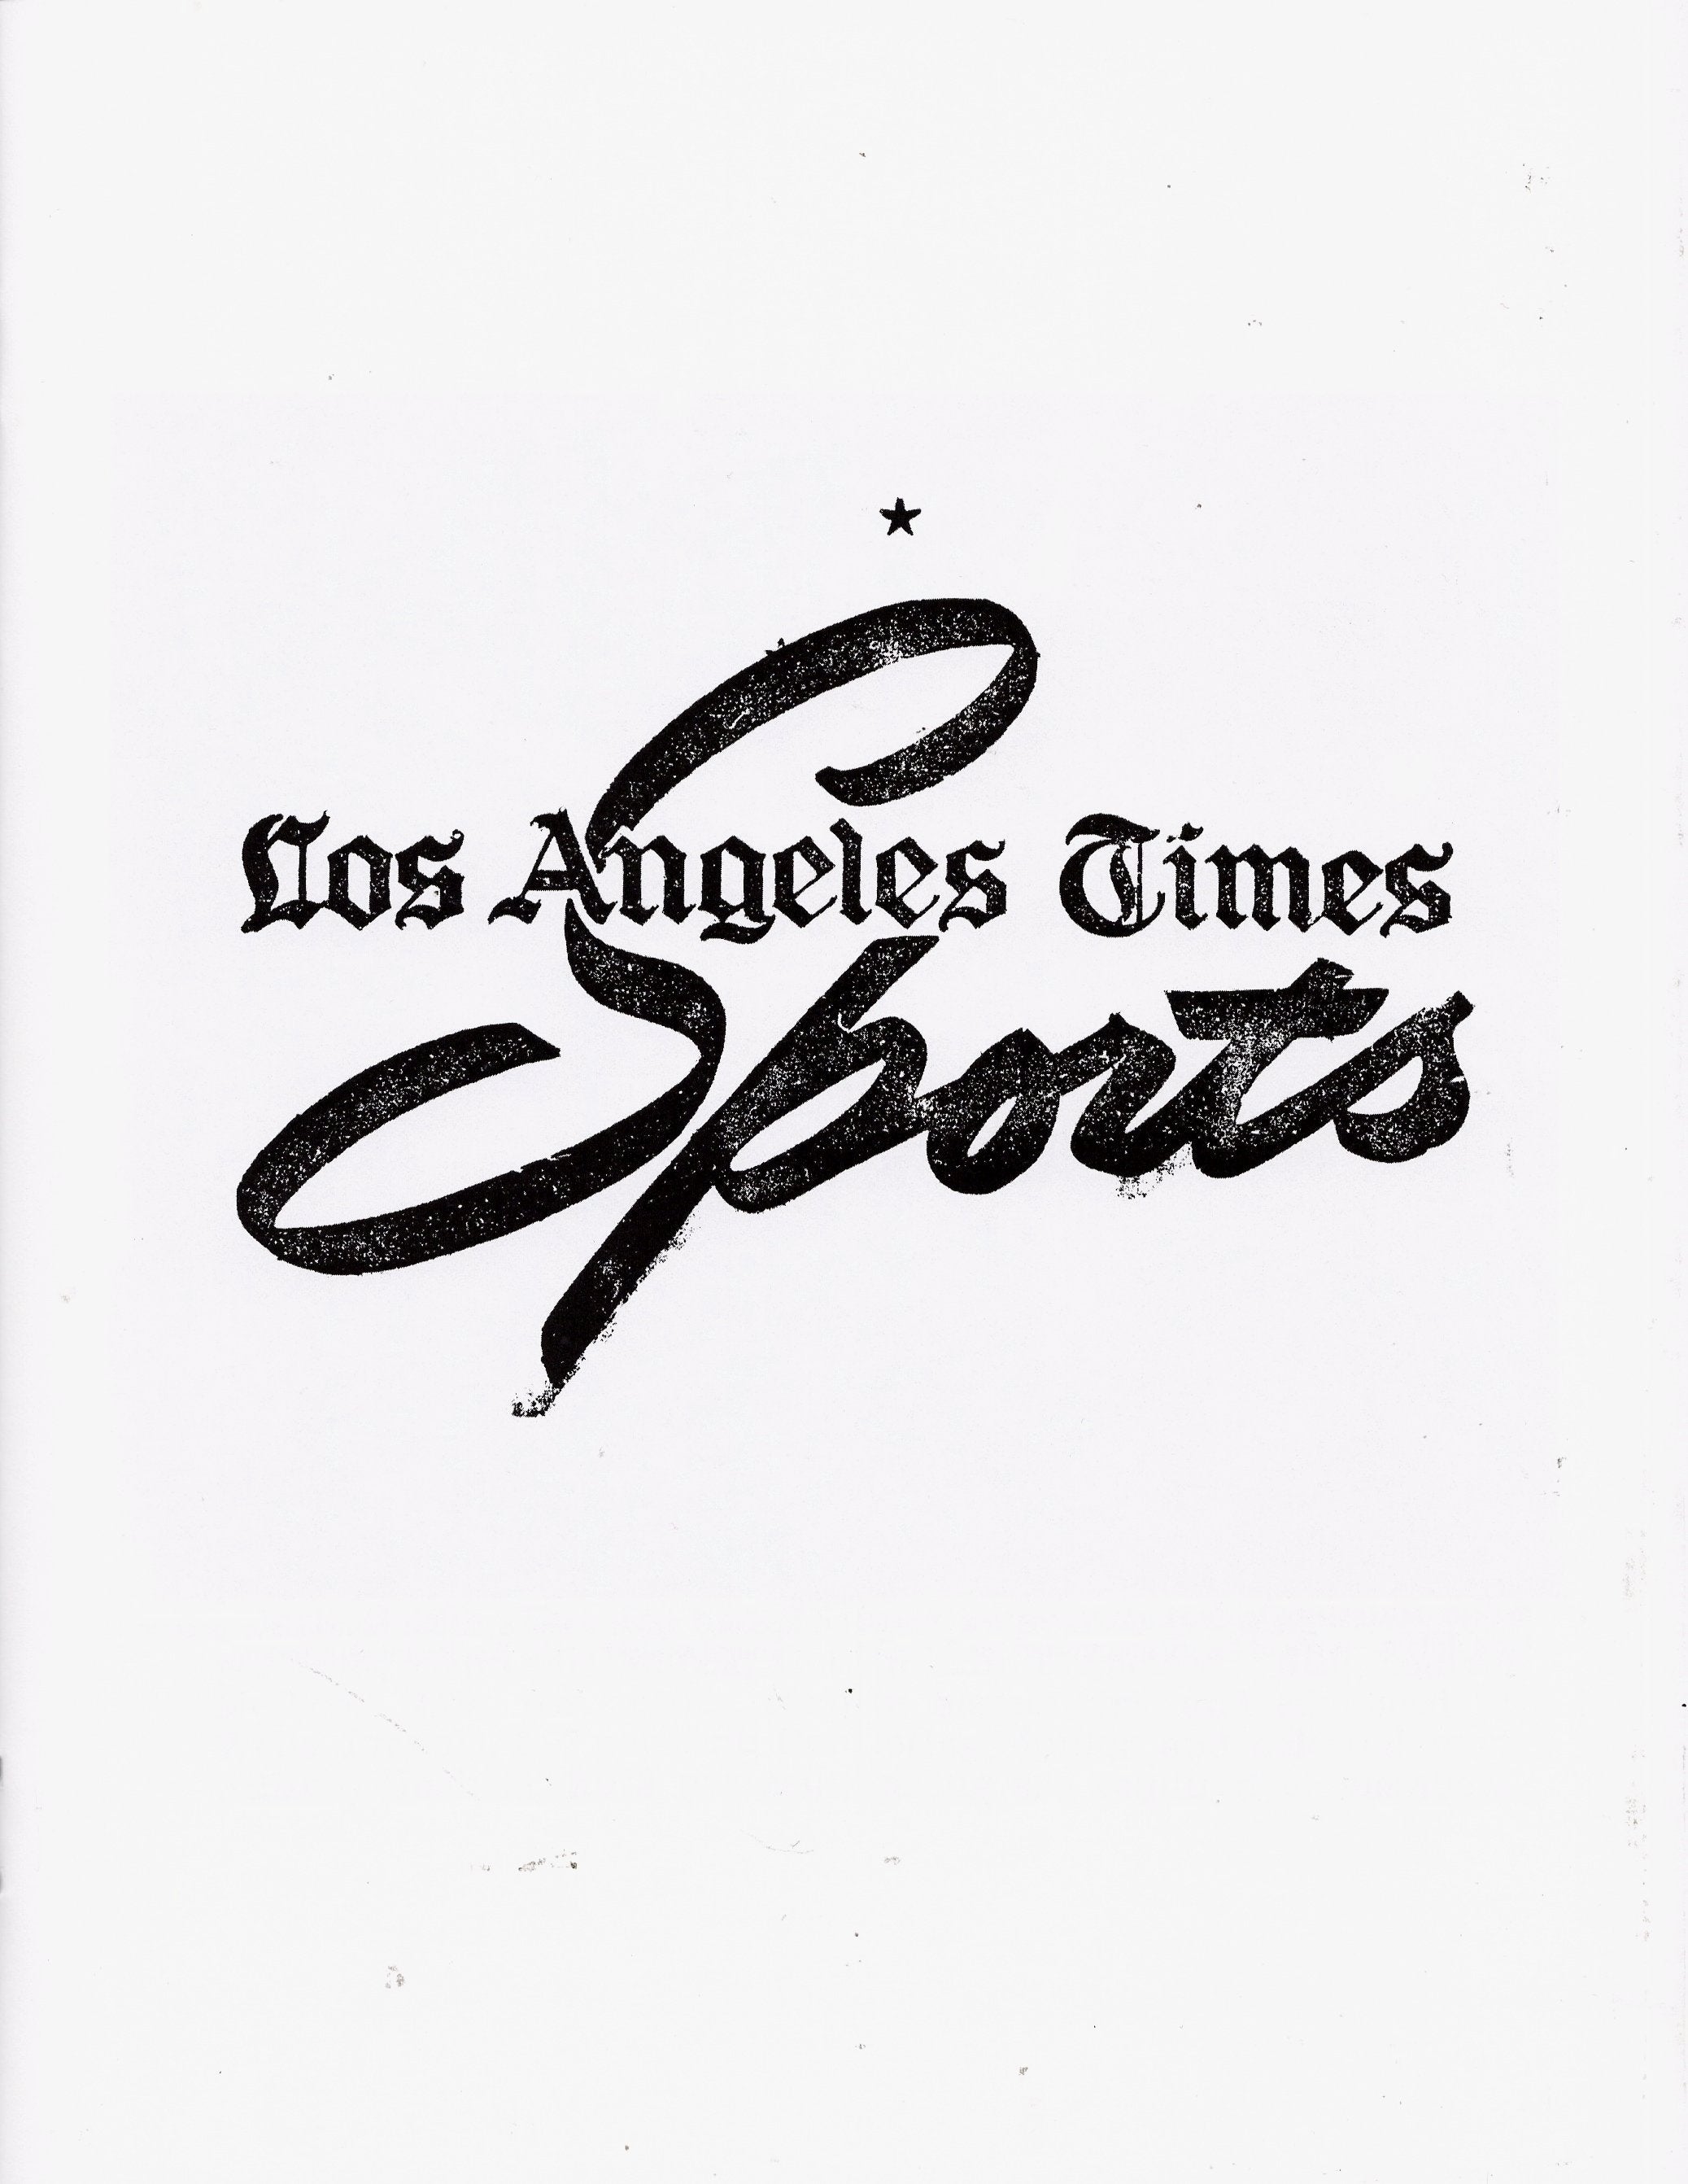 Laura Owens: Untitled Zine (Los Angeles Times Sports)